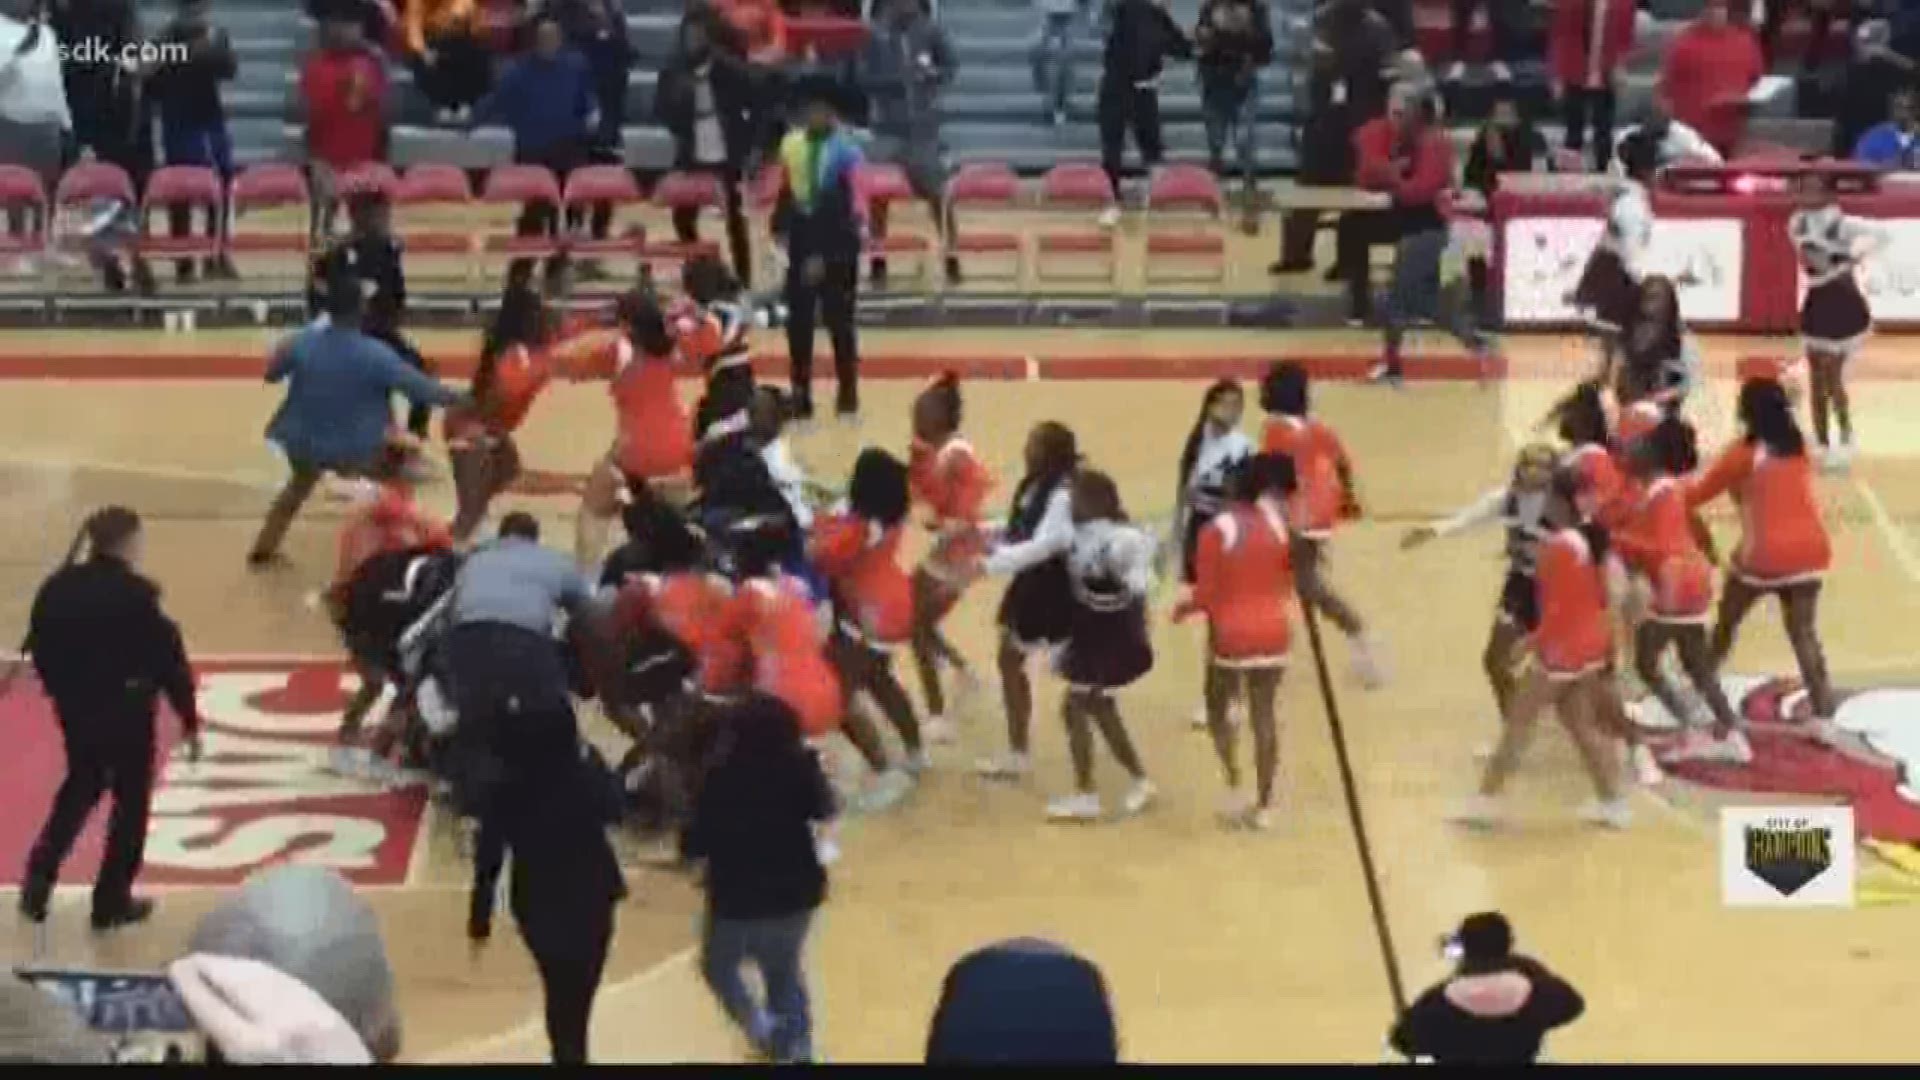 The East St. Louis cheerleading team is benched for their role in this fight. Jenna Barnes talked to the man who recorded the video. He's defending the girls.